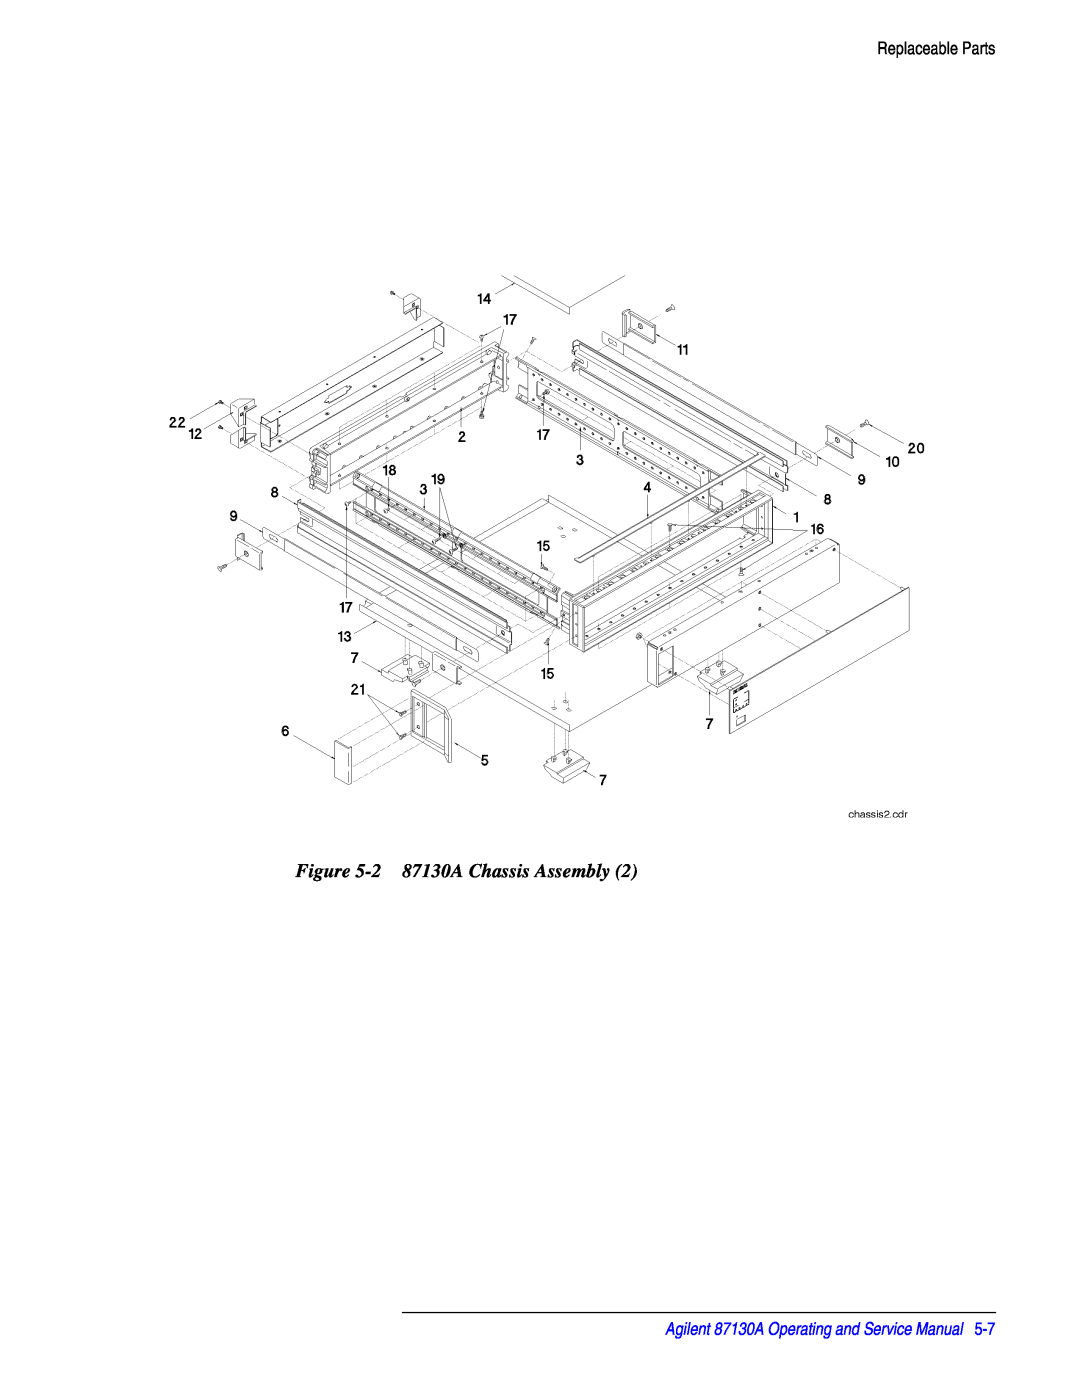 Agilent Technologies manual 2 87130A Chassis Assembly, Replaceable Parts, Agilent 87130A Operating and Service Manual 